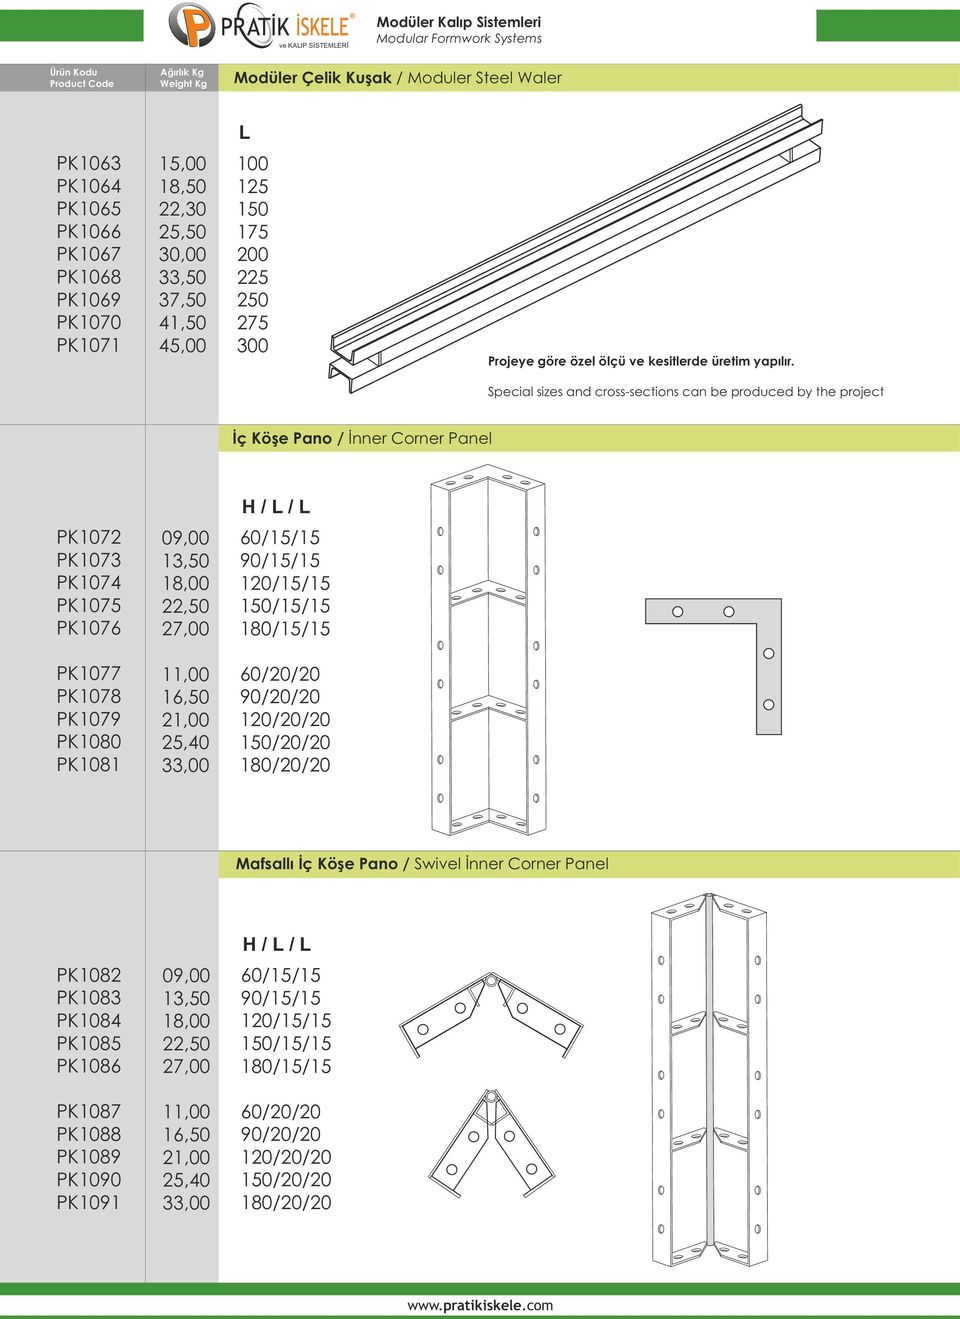 Special sizes and cross-sections can be produced by the project İç Köşe Pano / İnner Corner Panel PK1072 PK1073 PK1074 PK1075 PK1076 PK1077 PK1078 PK1079 PK1080 PK1081 09,00 13,50 18,00 22,50 27,00